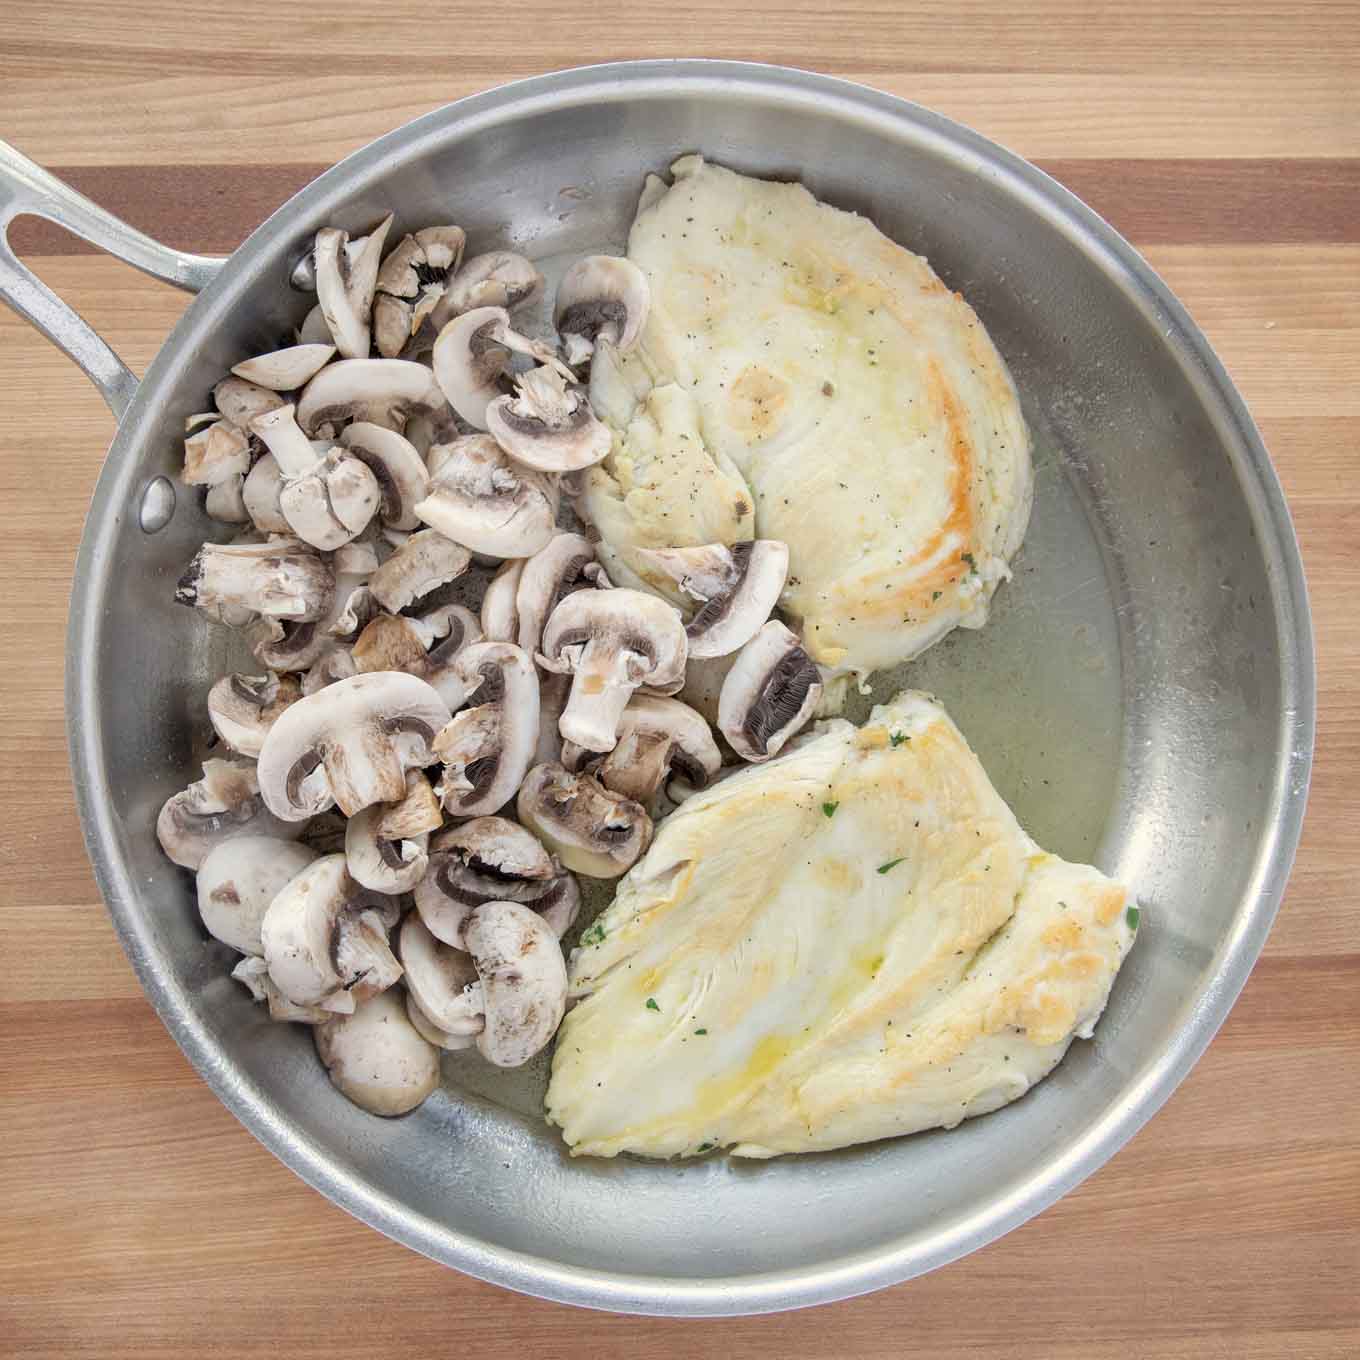 2 chicken breasts and mushrooms in a saute pan